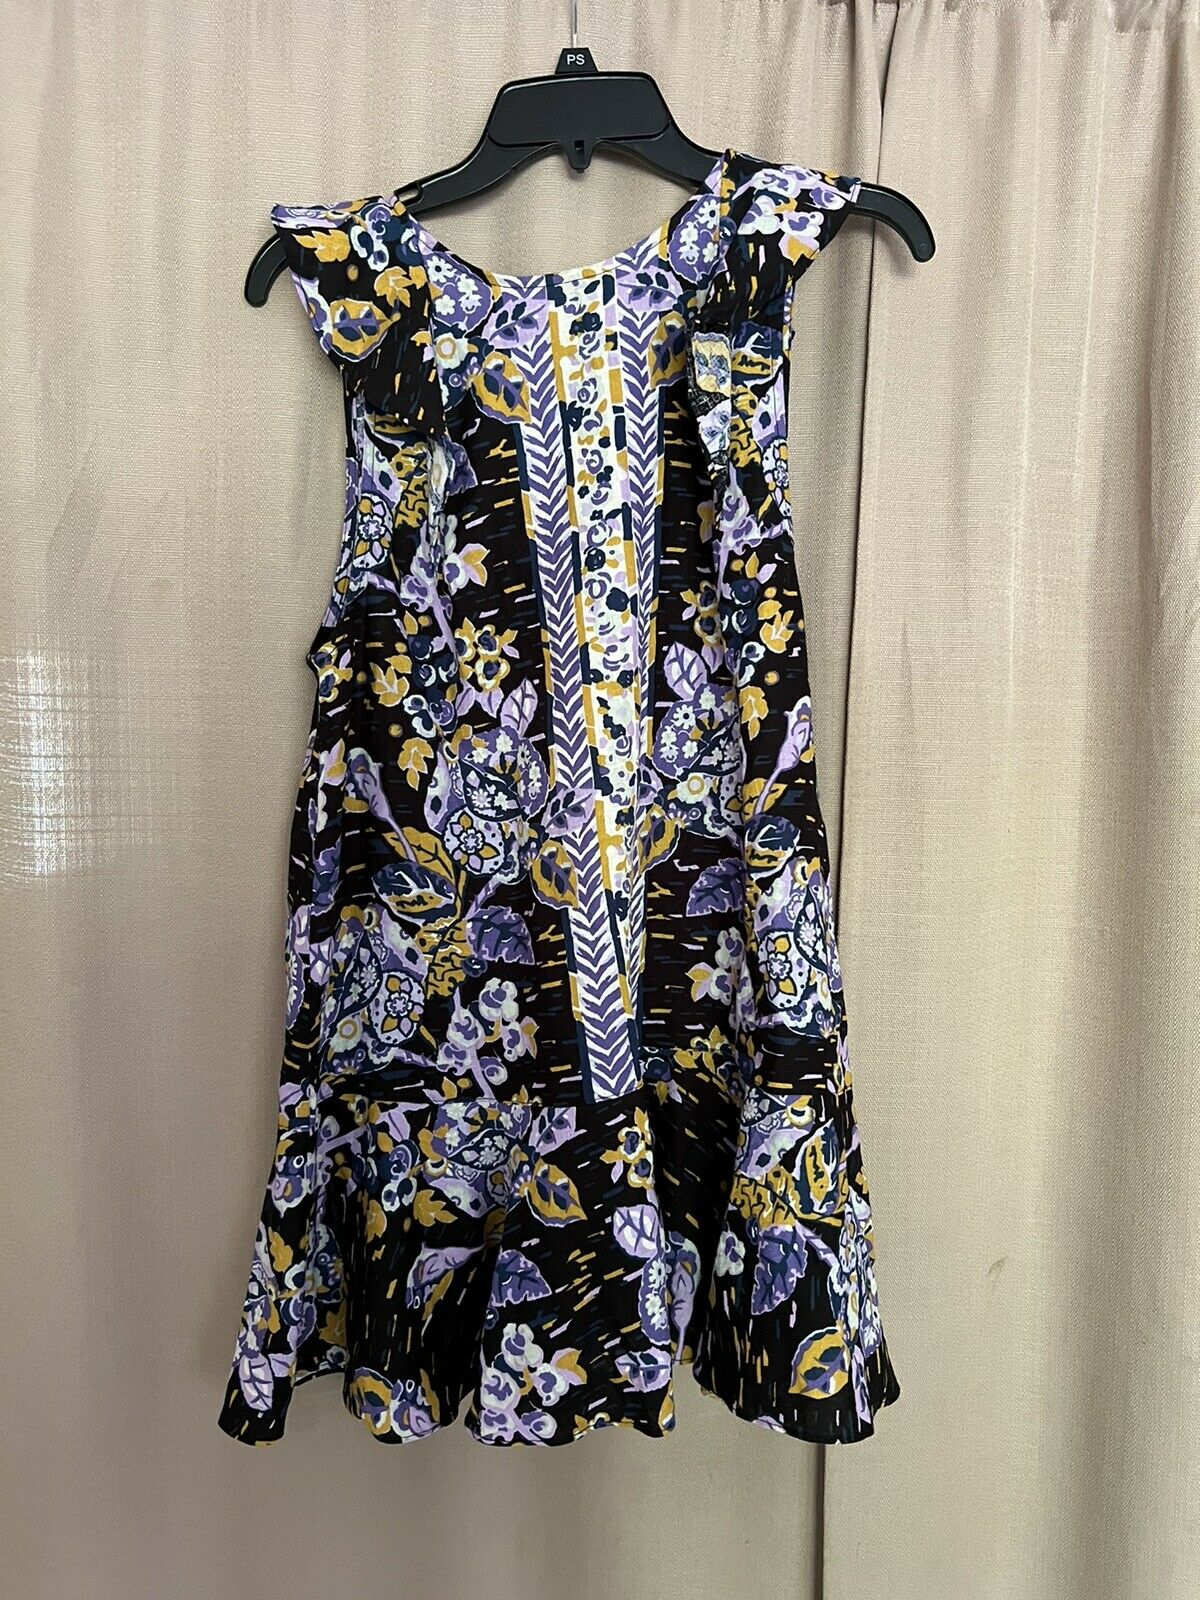 Free People S/P($168) Size PS